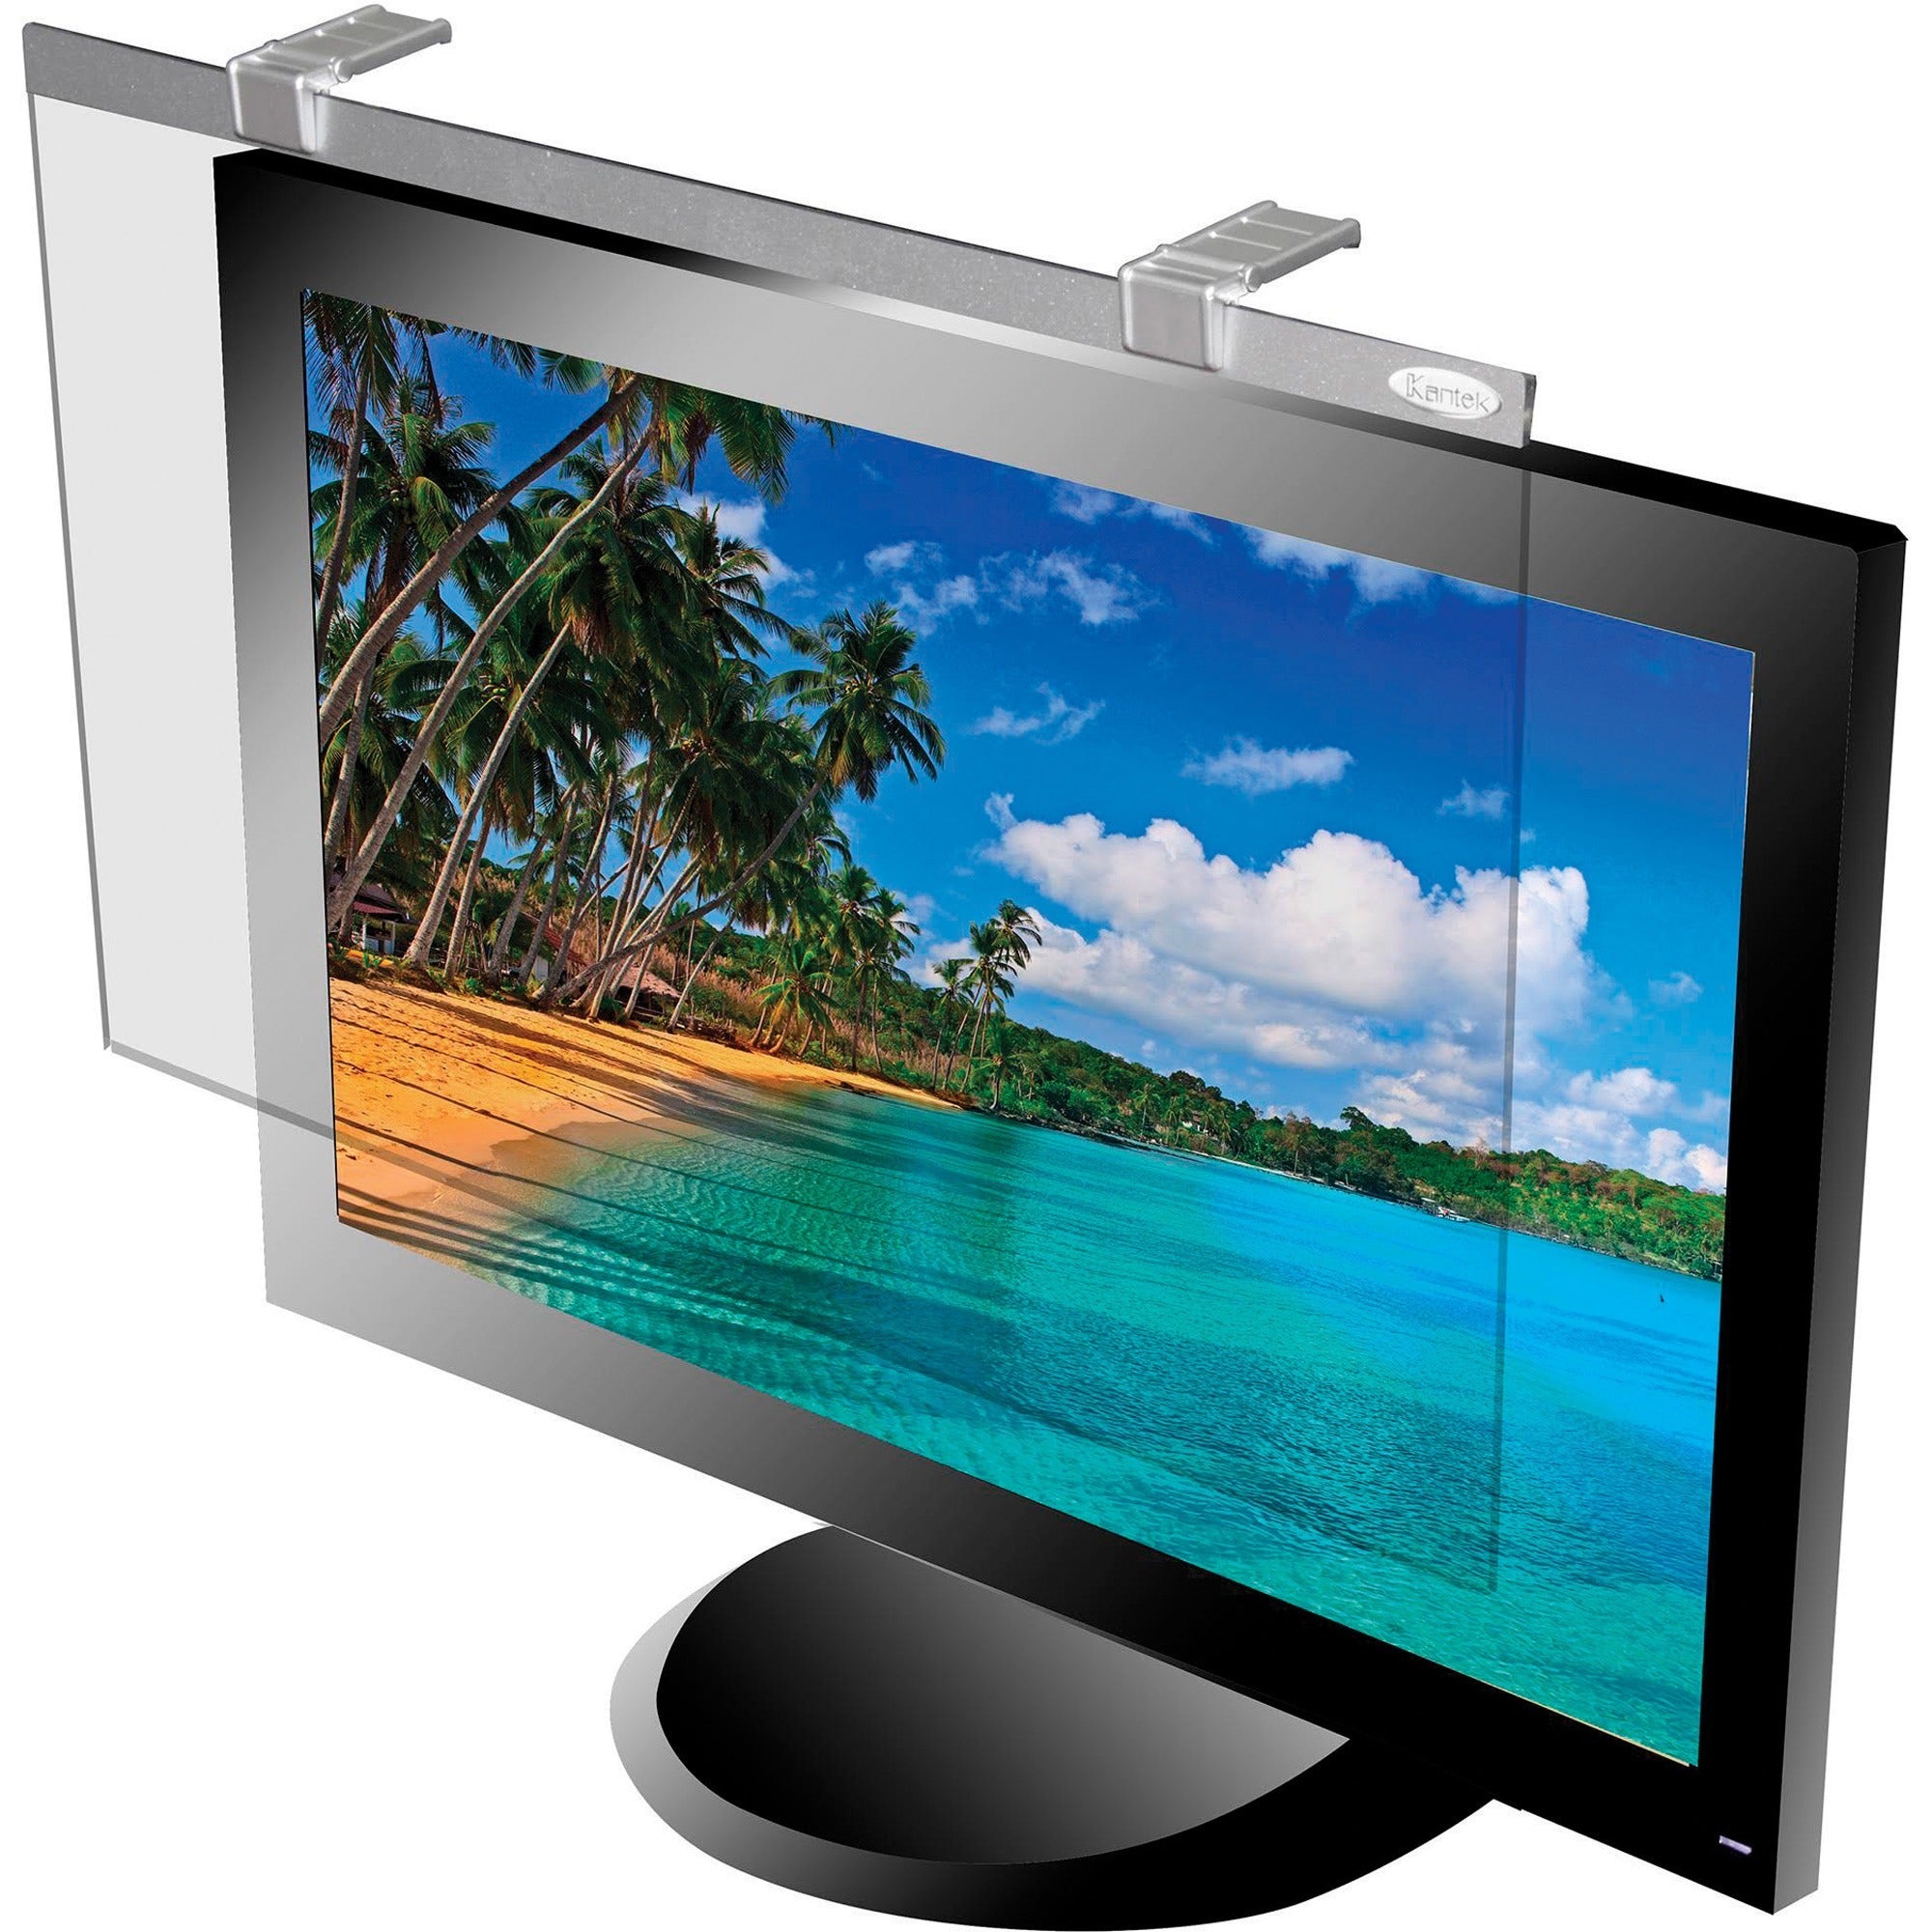 Kantek LCD Protect Glare Filter 24in Widescreen Monitors - For 24"LCD Monitor - Scratch Resistant, Damage Resistant - Acrylic - Anti-glare - 1 Pack - 1